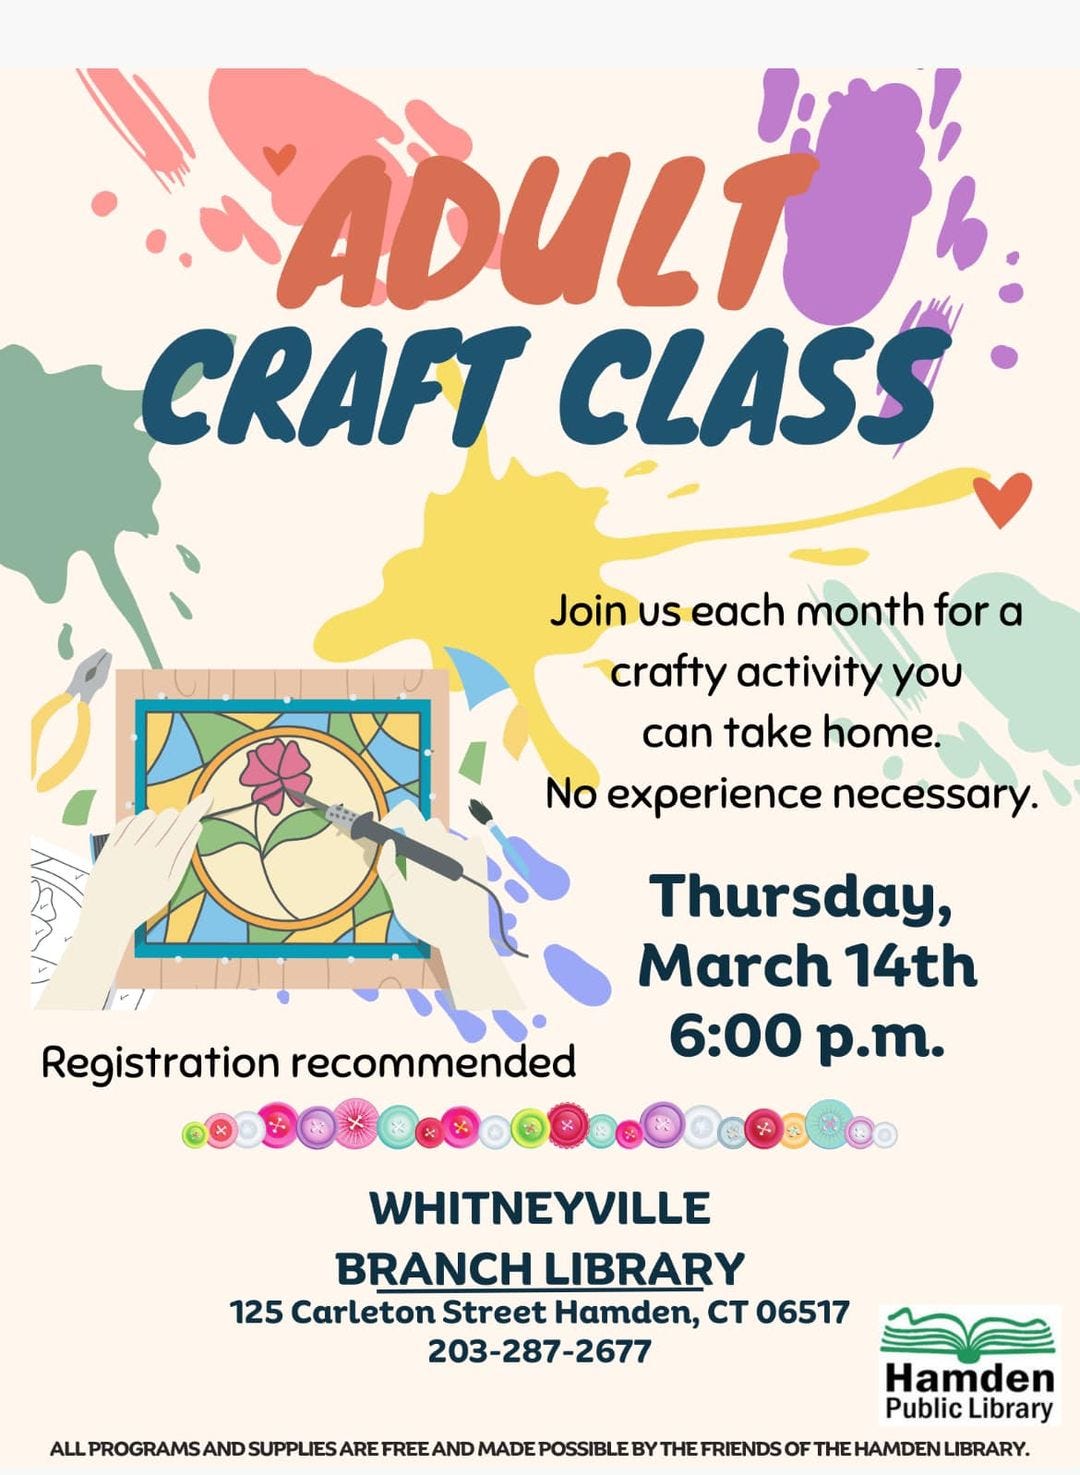 May be an image of text that says 'ADULT CRAFT CLASS Join US each month for crafty activity you can take home. No experience necessary. Registration recommended Thursday, March 14th 6:00 p.m. WHITNEYVILLE BRANCH LIBRARY 125 Carleton Street Hamden, CT 06517 203-287-2677 Hamden Public Library'